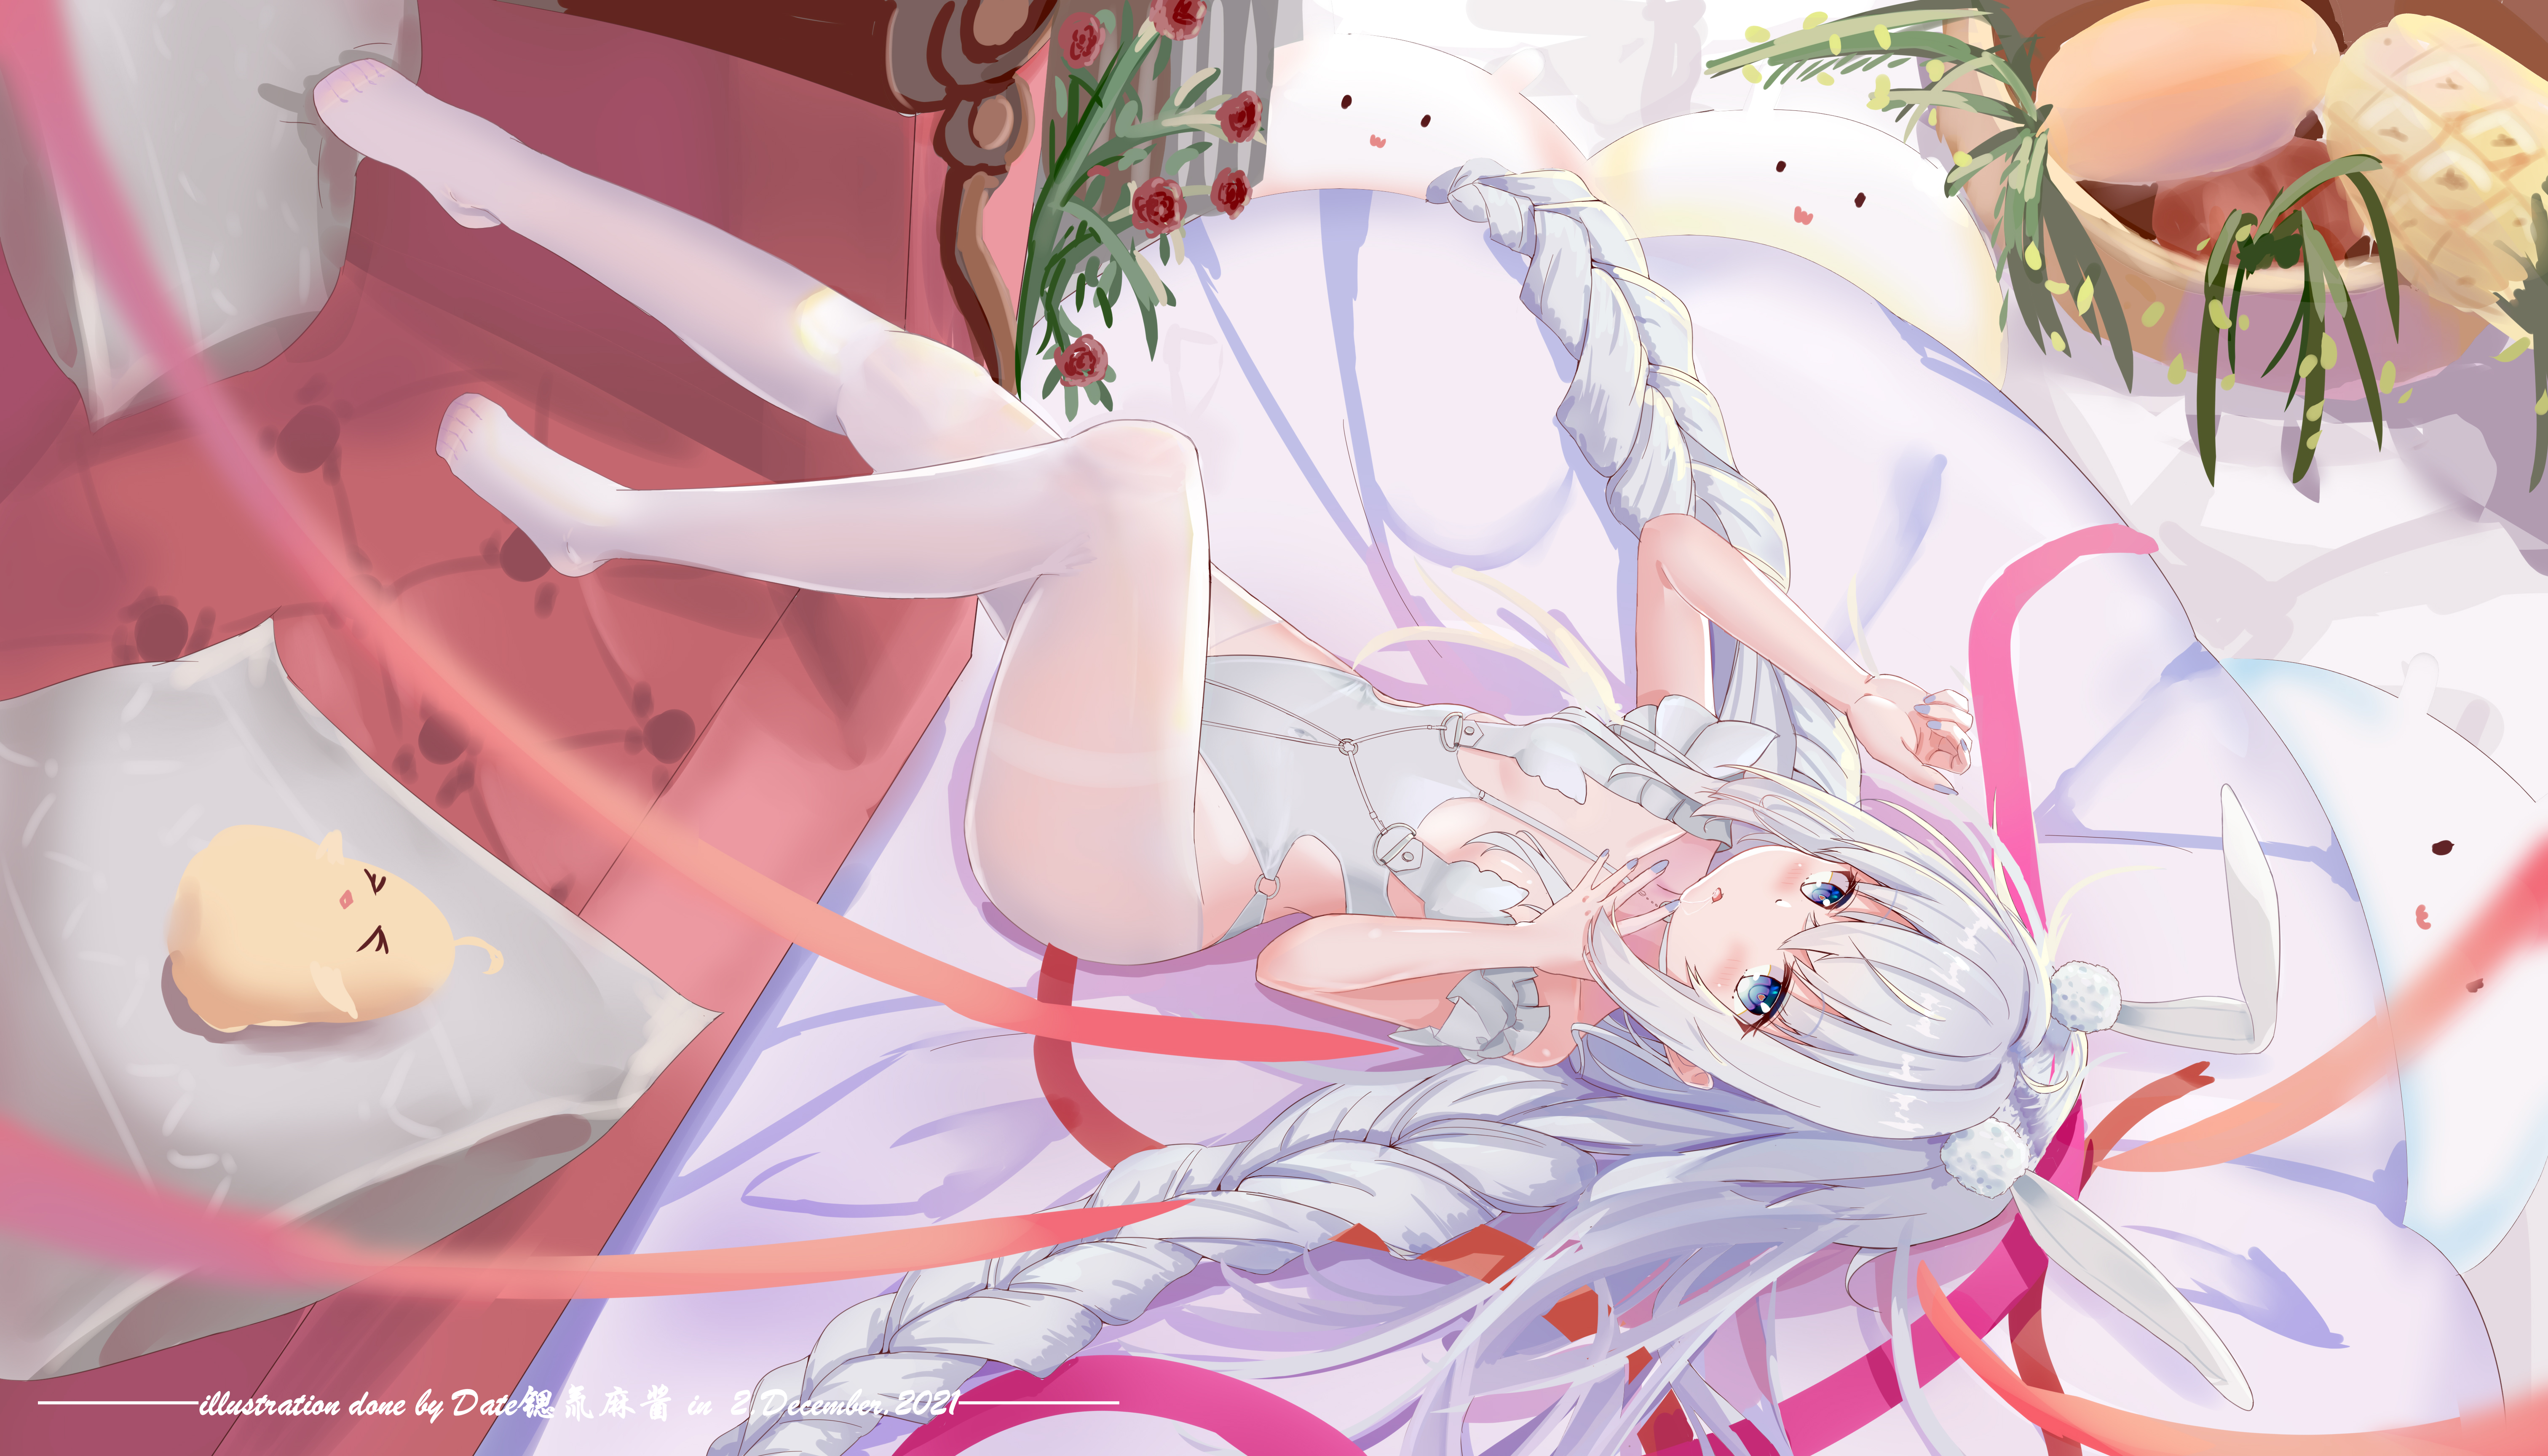 Anime 6048x3456 anime anime girls Pixiv animal ears blue eyes gray hair long hair bunny ears rose flowers food Date Shichuan Majiang Manjuu (Azur Lane) frills Le Malin (Azur Lane) feet pointed toes Azur Lane lying down lying on back bunny suit bunny girl looking at viewer braids hair bows blushing white pantyhose pantyhose ribbon women indoors hair spread out leotard white leotard leaves skinny painted nails blue nails